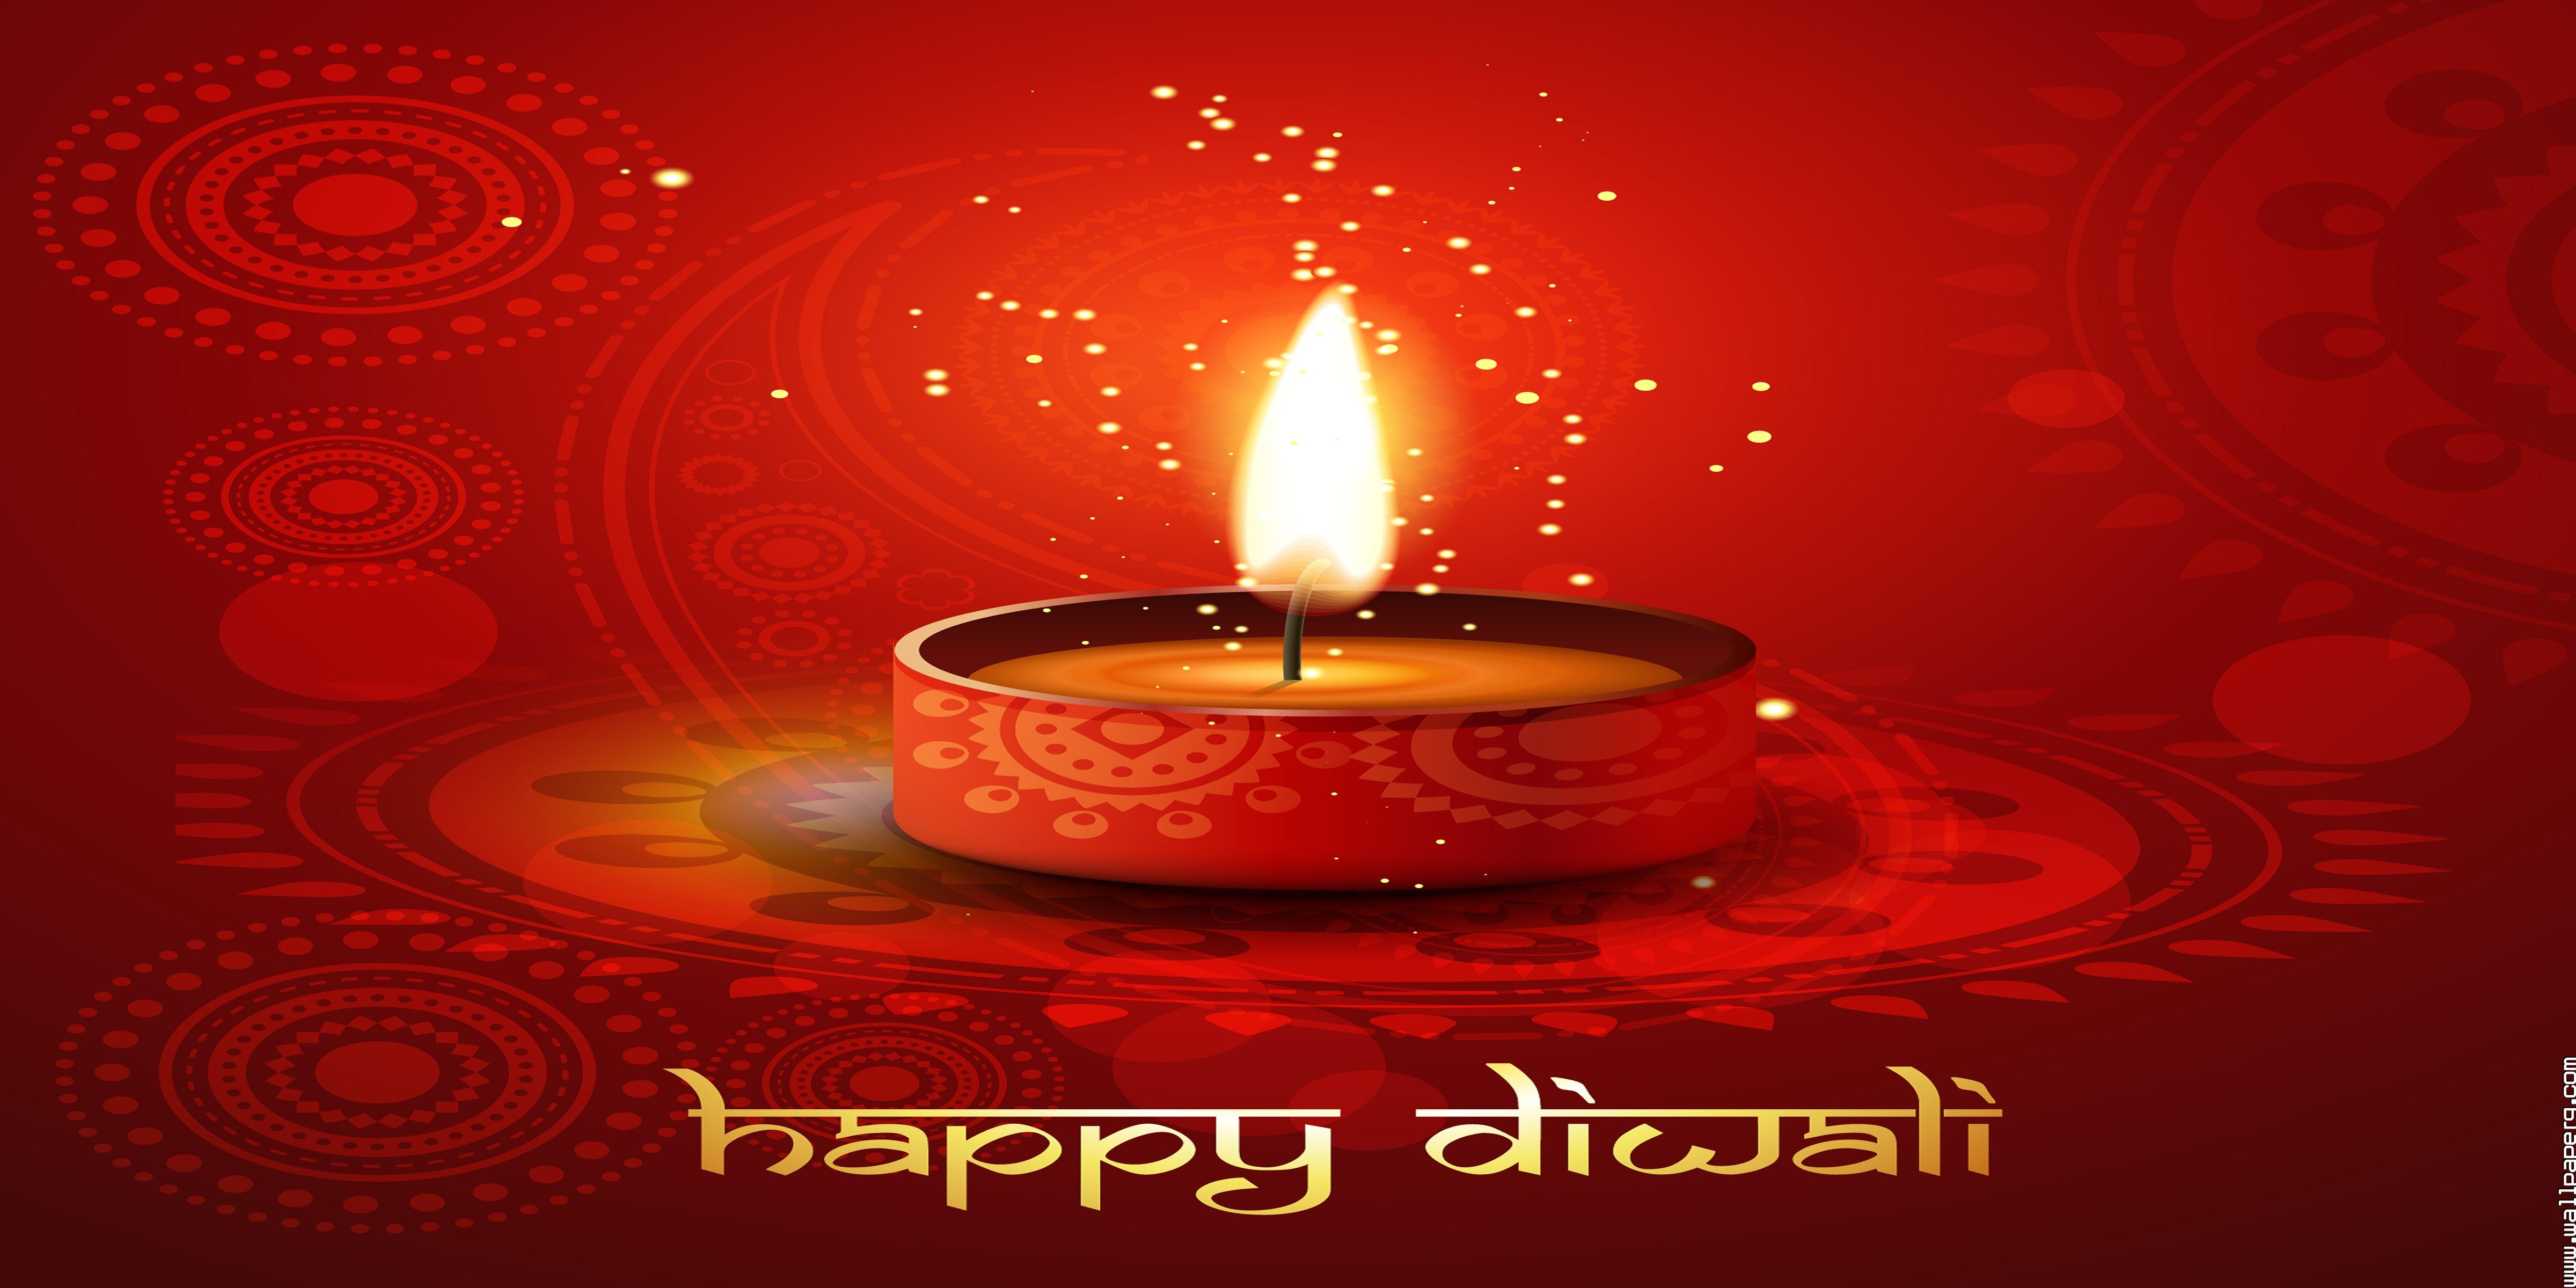 Download Full hd happy diwali 2013 14 wallpapers greetings - Lohri festival  wallpapers for your mobile cell phone